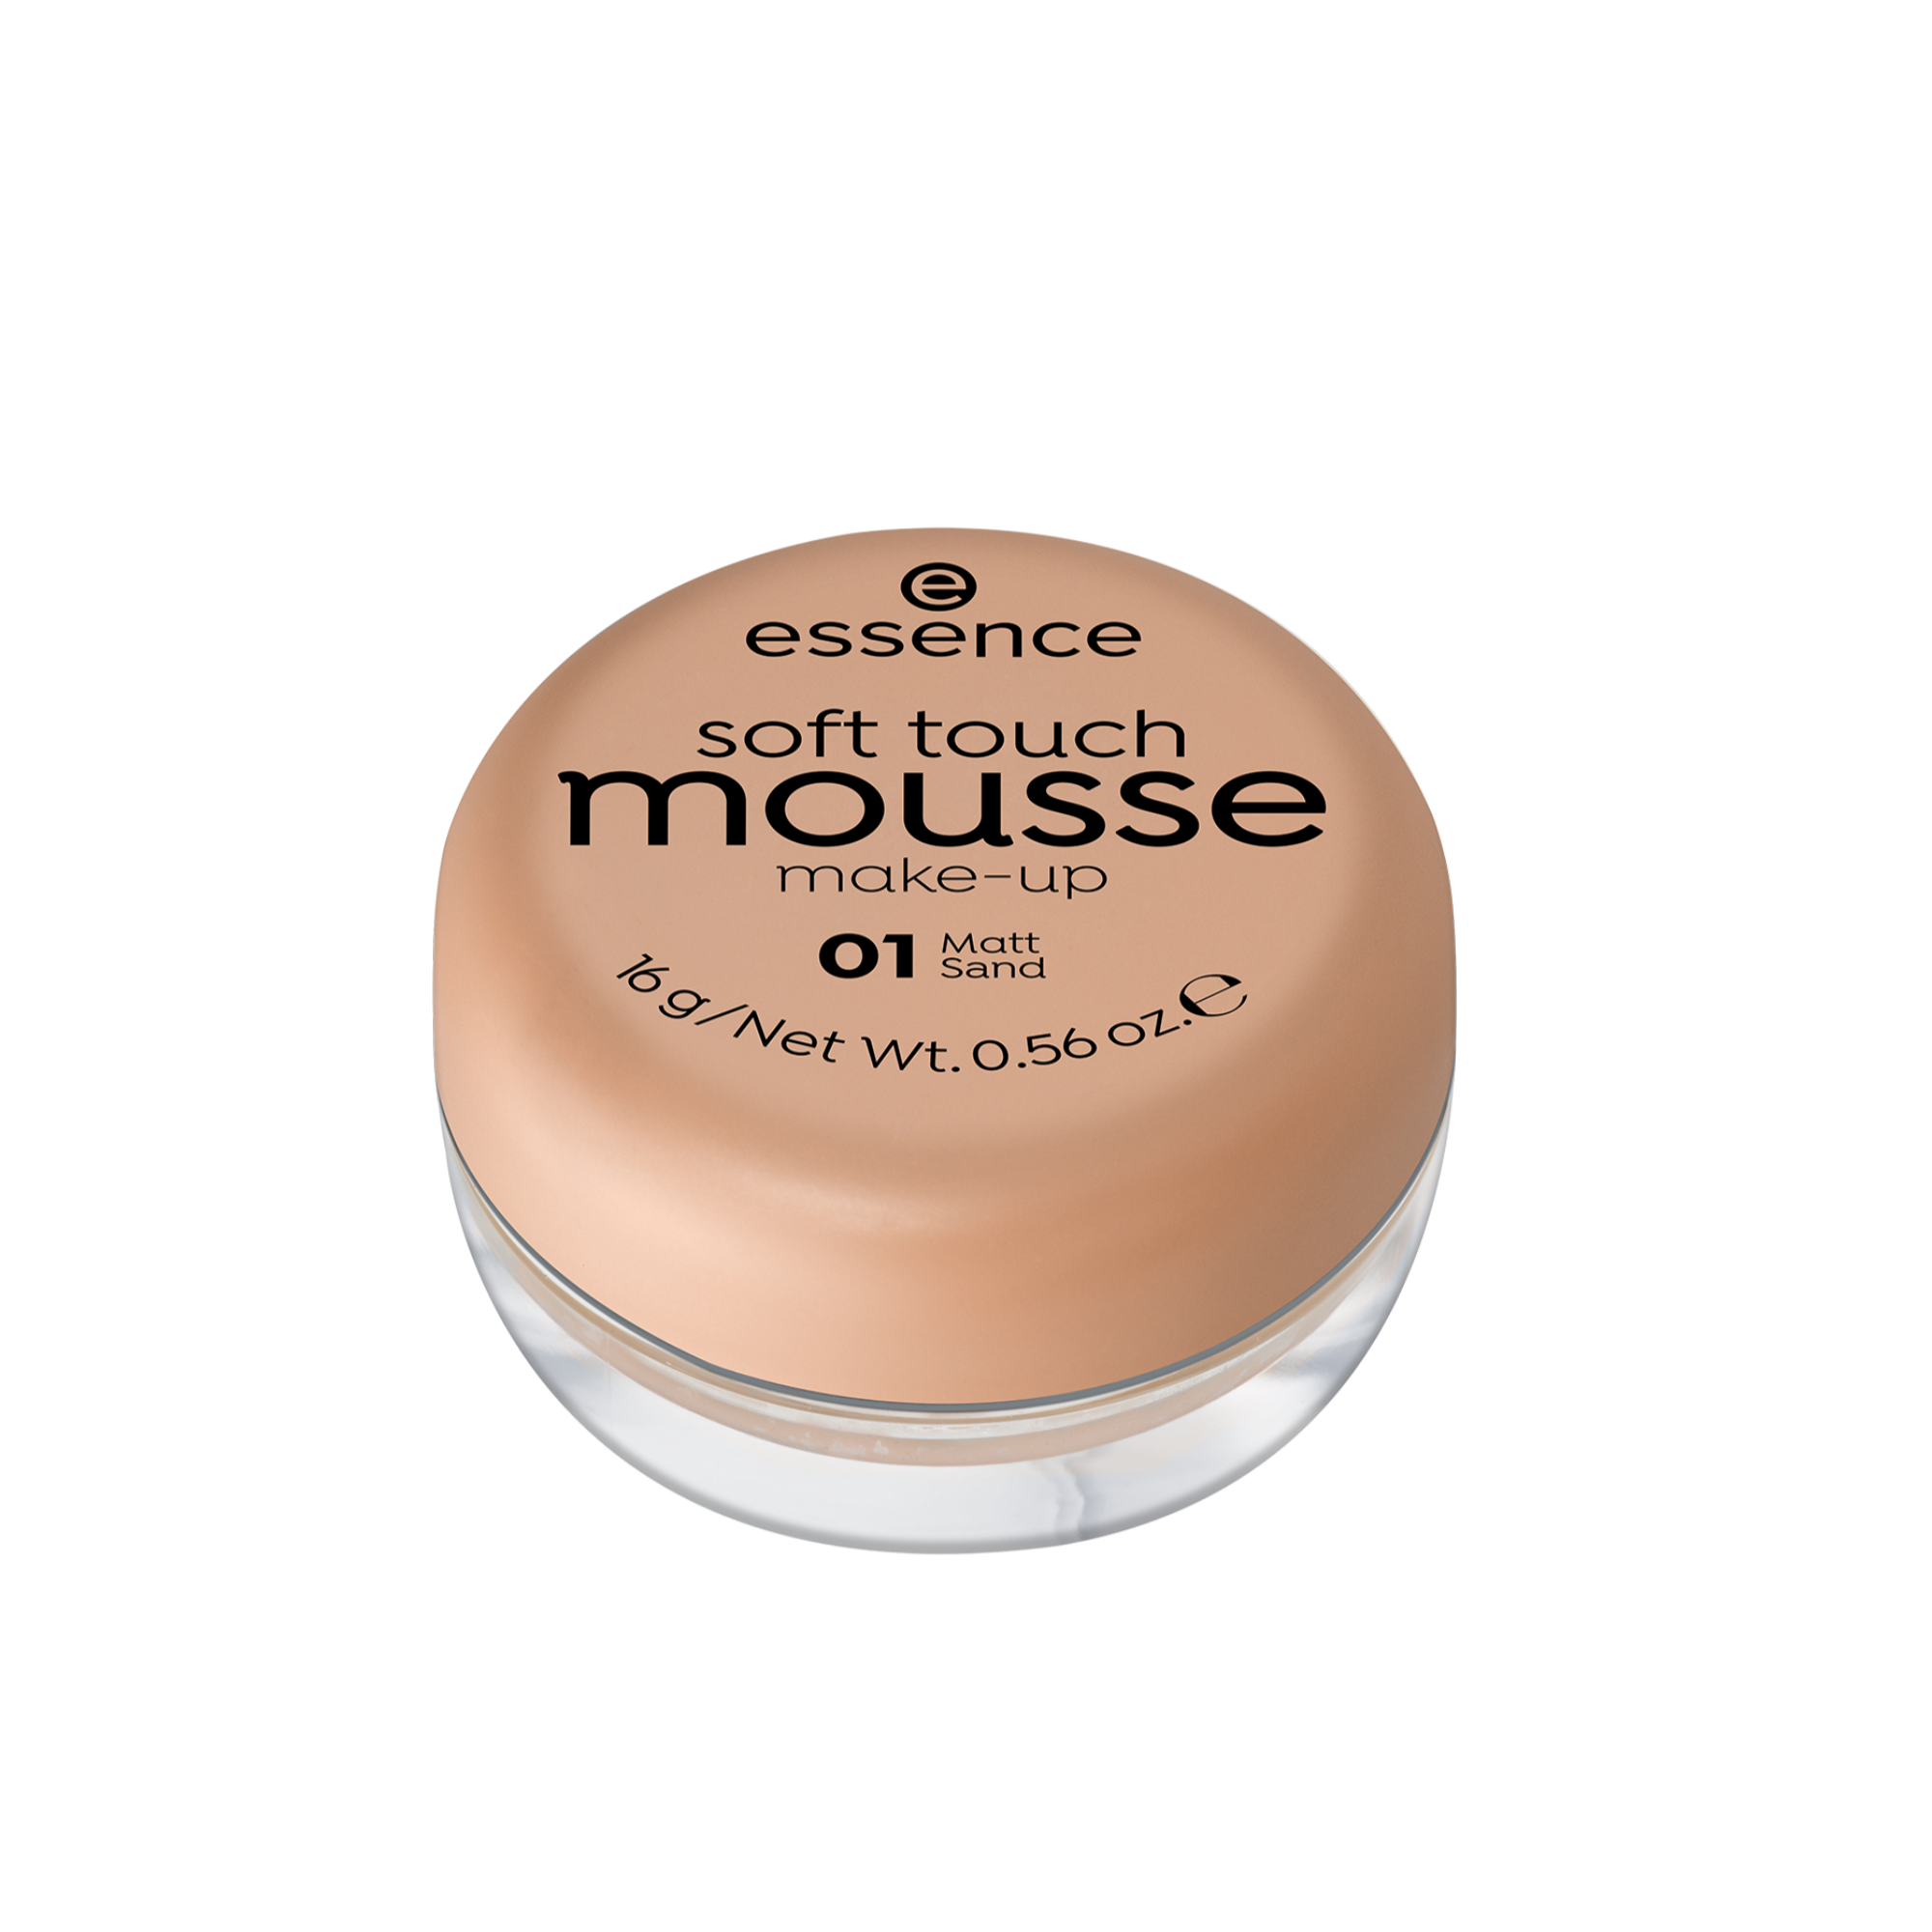 soft touch mousse maquillaje